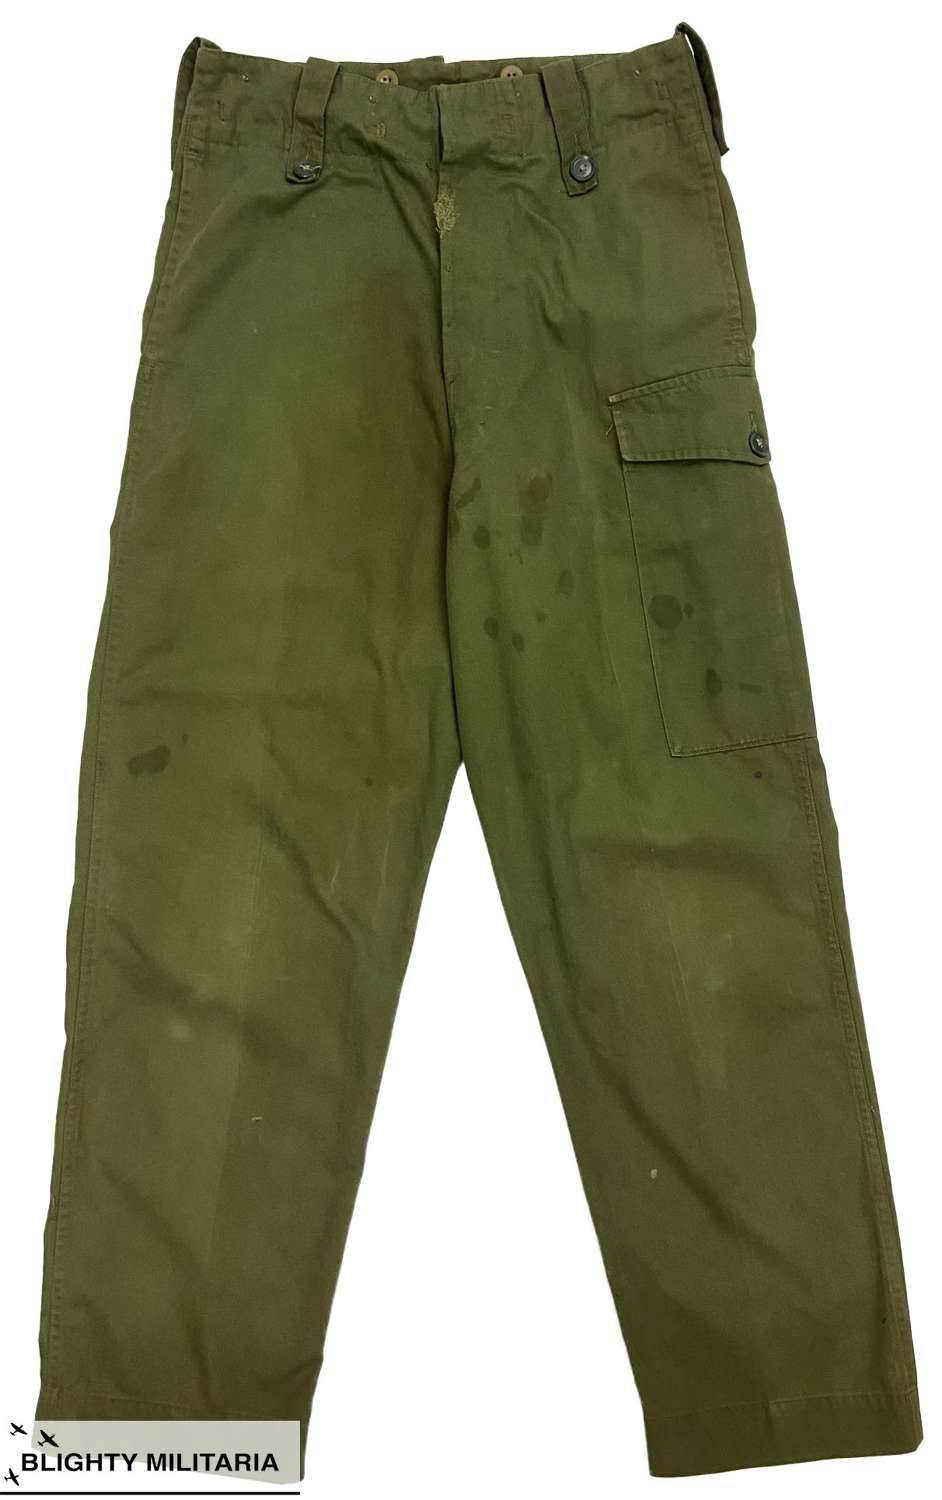 Original 1970s British Army 'Trousers, Overall Green'